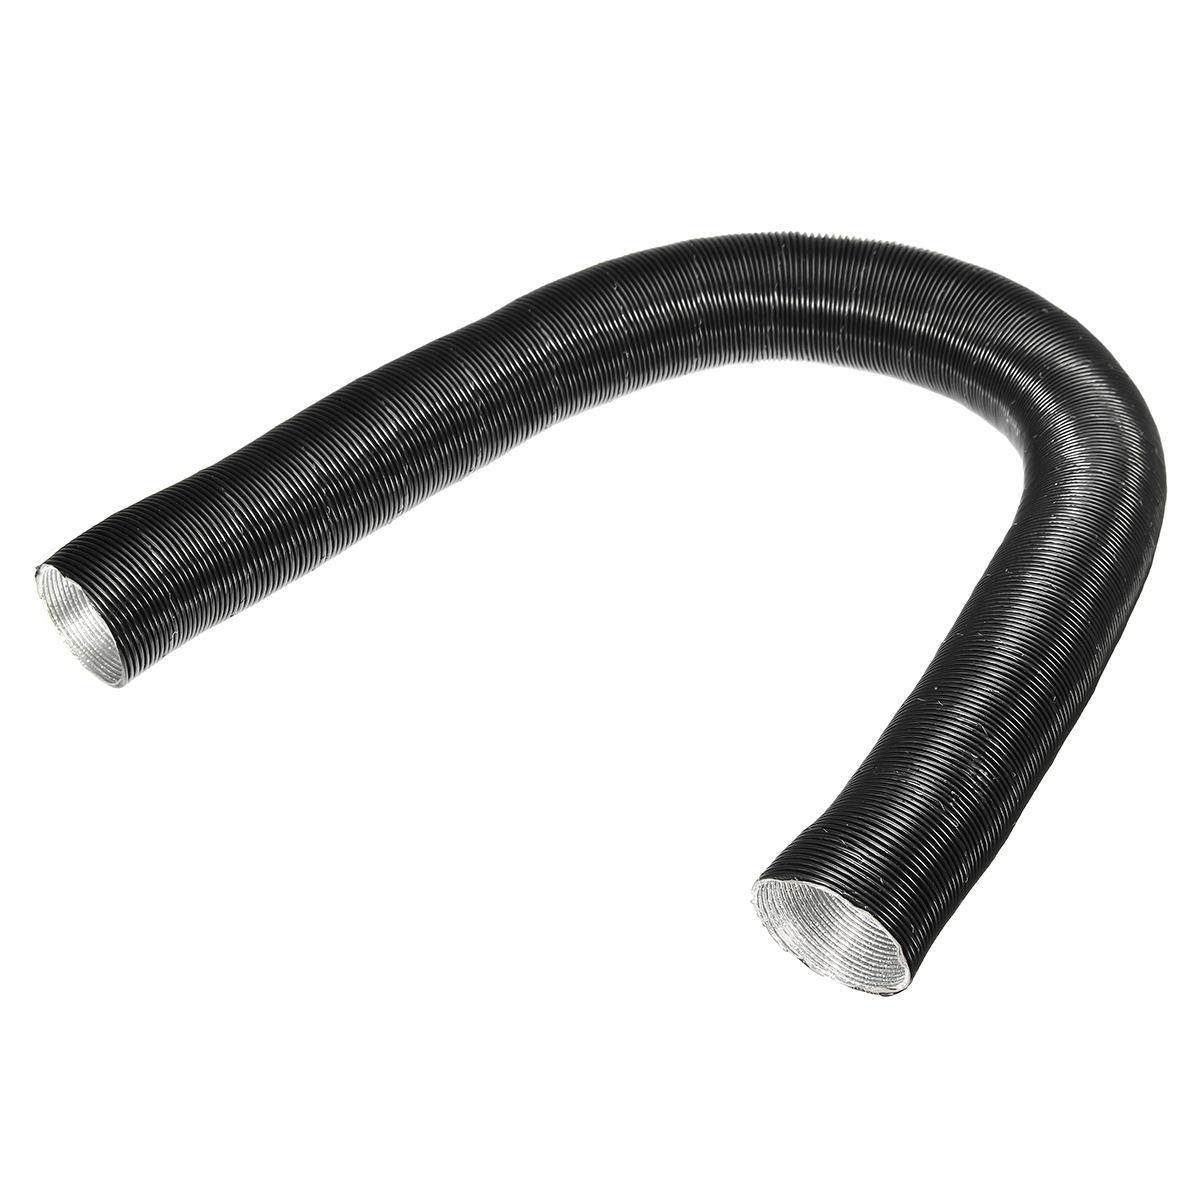 24mm-Exhaust-Silencer--25mm-Filter-Exhaust-and-Intake-Pipe-for-Air-Diesel-Heater-Accessories-1396670-8